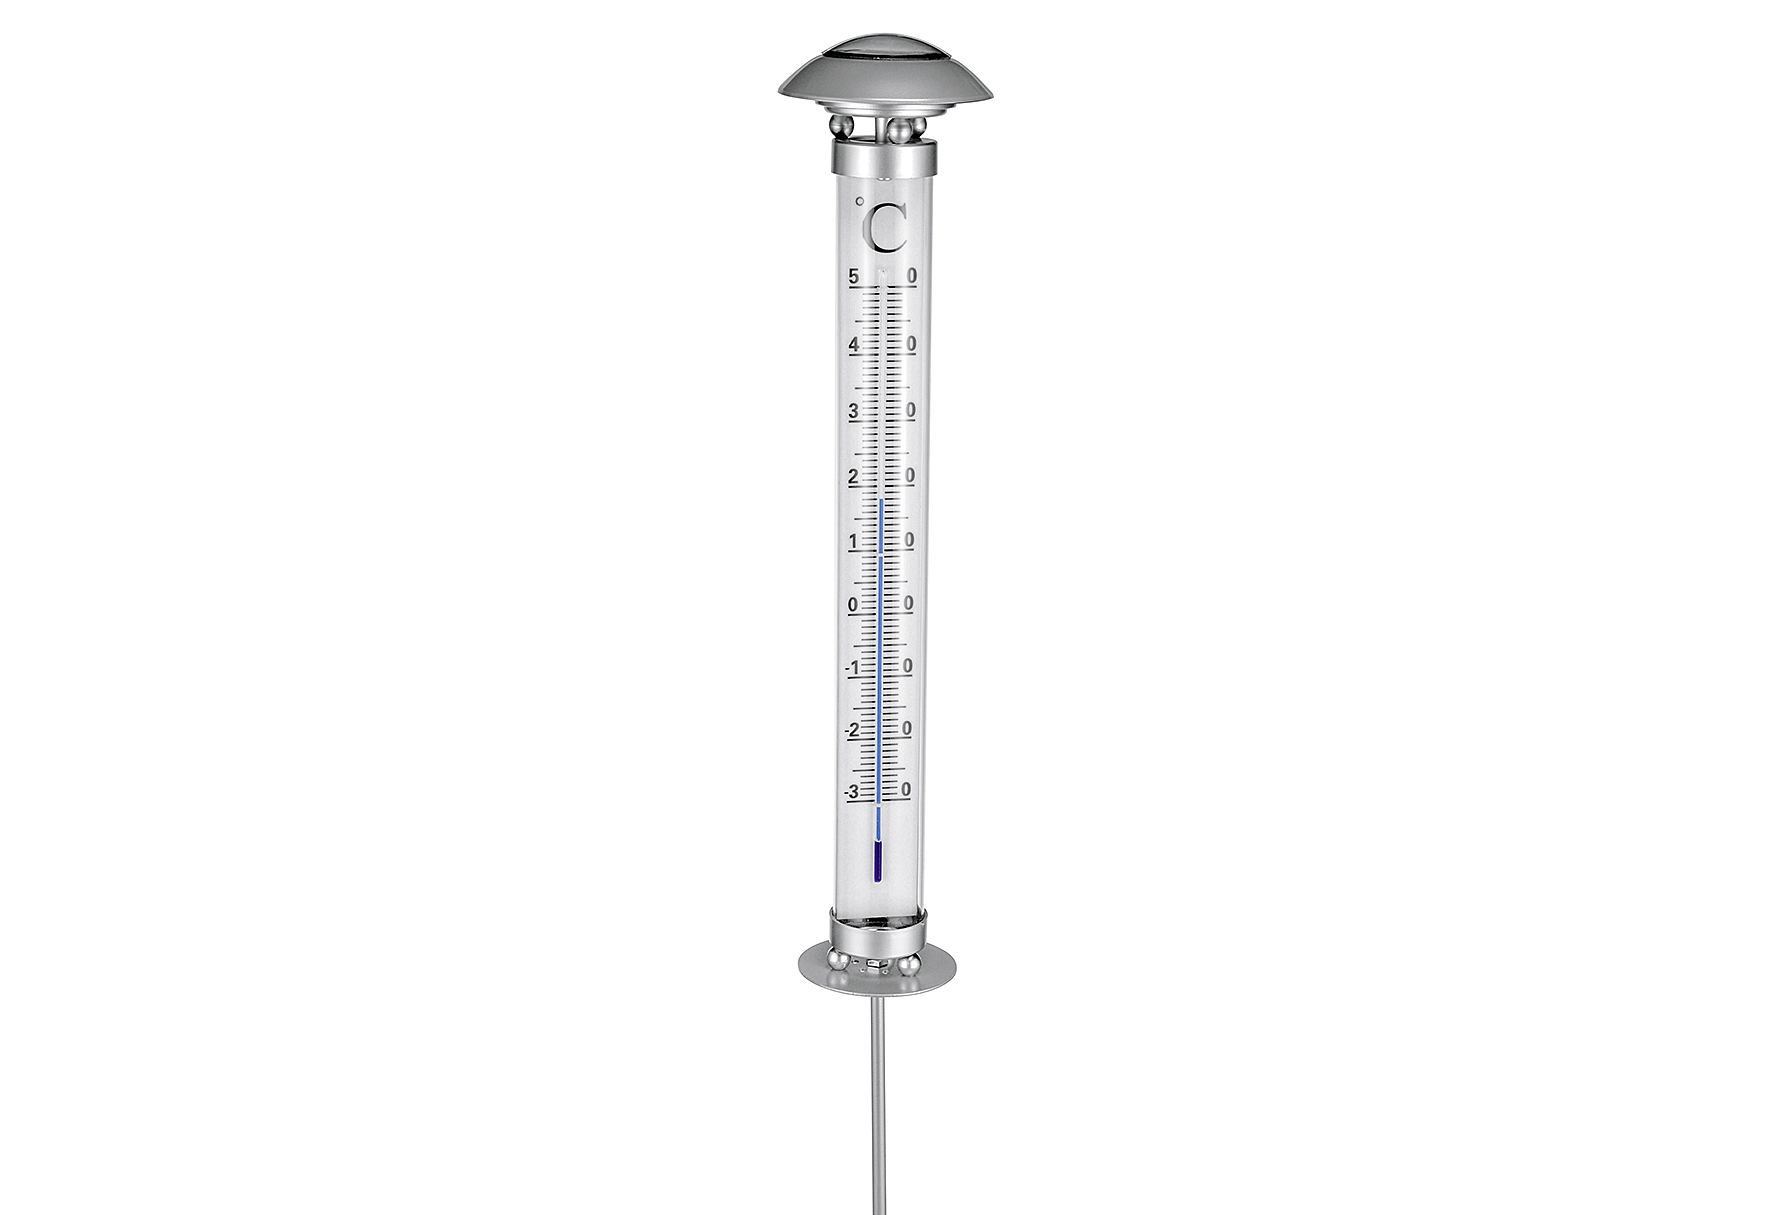 HI Thermometer inkl. 1x Mignon AA Batterie